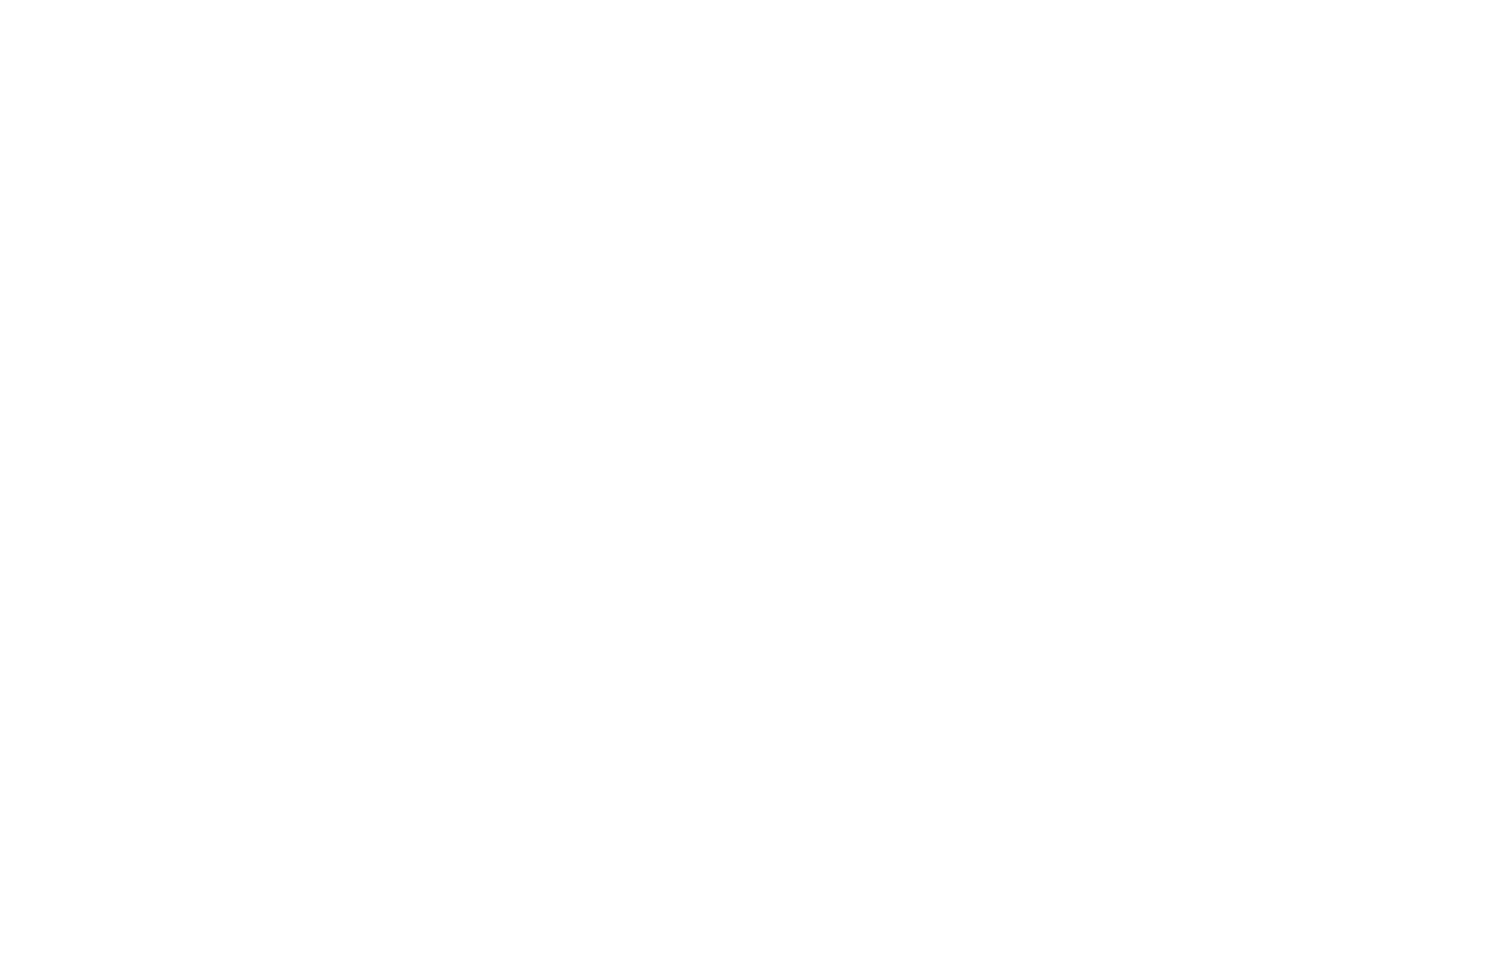 Eco Solutions 17